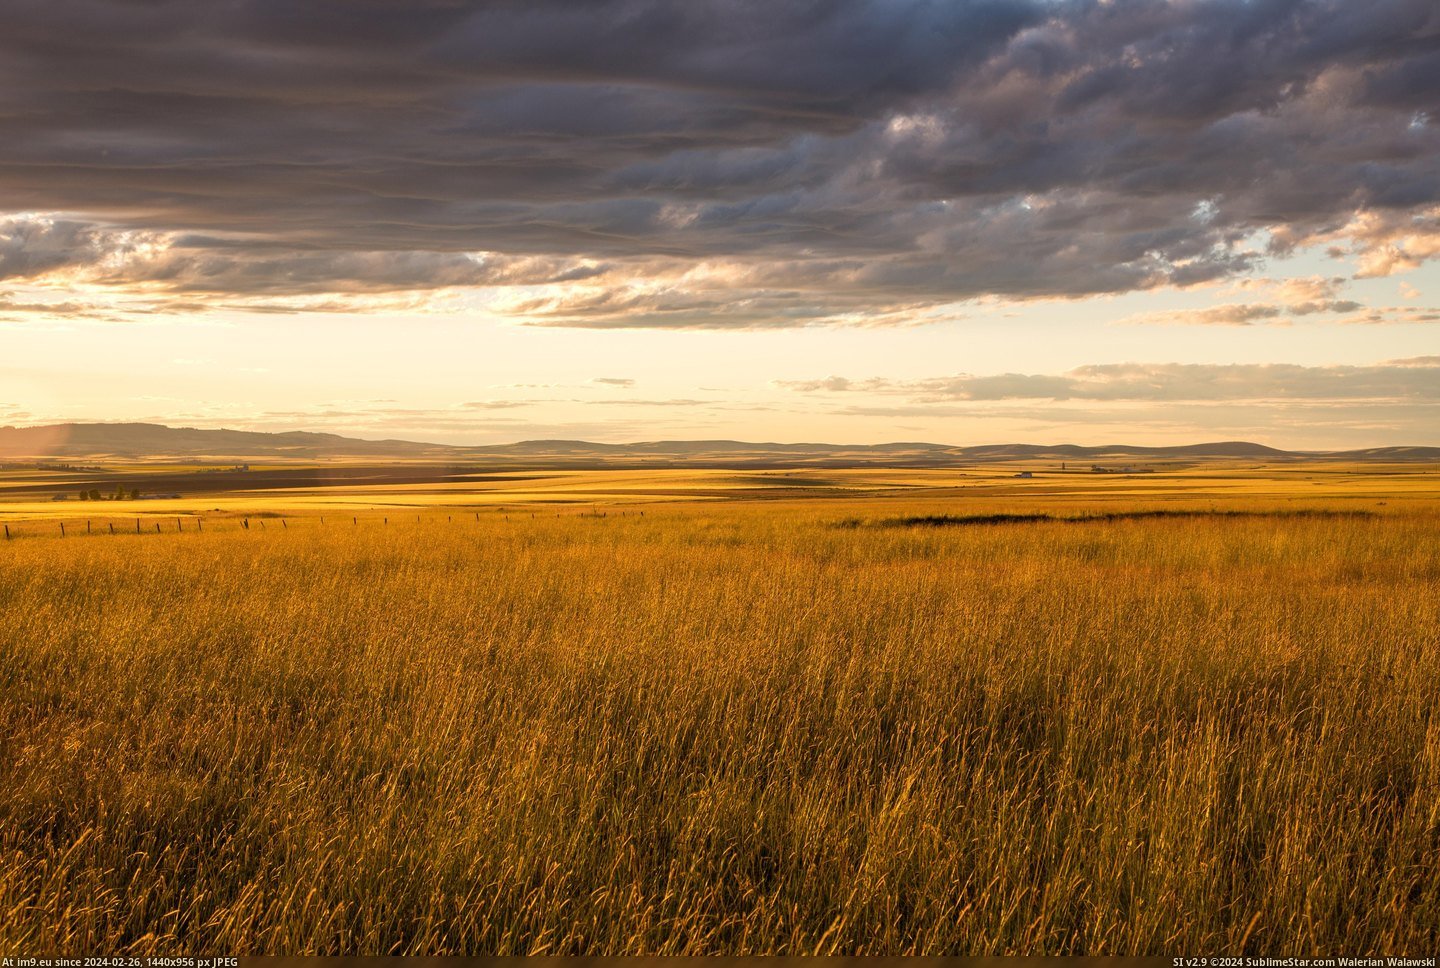 #Sunset #Golden #Wheat #Drenched #5000x3333 #Moscow #Fields [Earthporn] Wheat fields drenched in a golden sunset near Moscow, ID [OC][5000x3333] Pic. (Изображение из альбом My r/EARTHPORN favs))